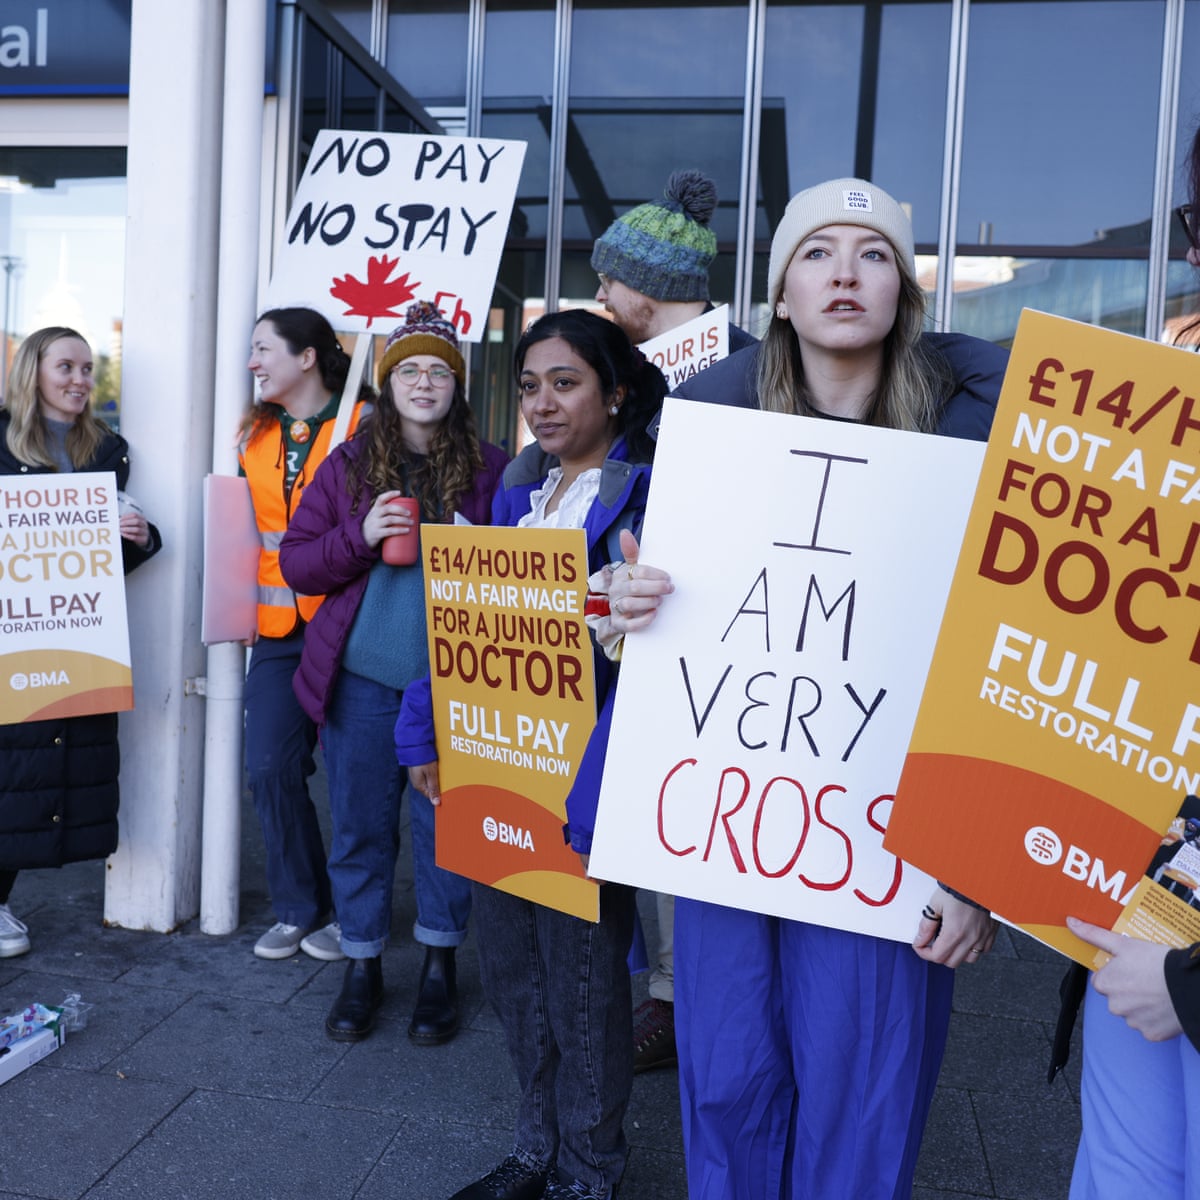 Junior doctors' strike: No 10 says there will be no talks with BMA unless  doctors abandon pay demands – as it happened, NHS